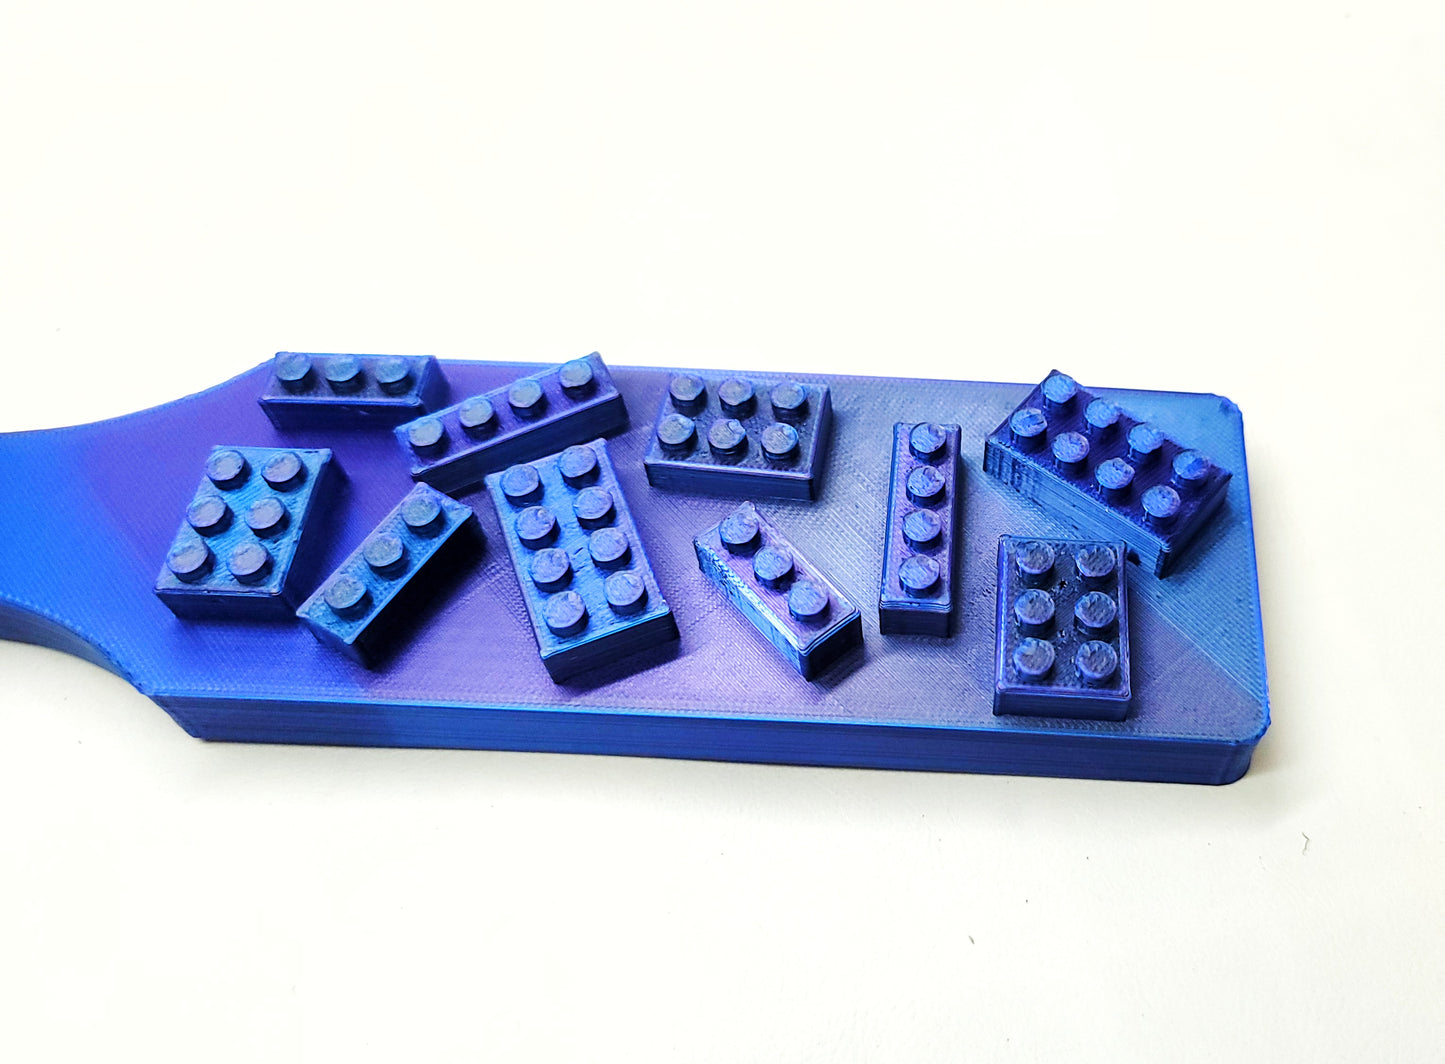 'Lego' Paddle in Blue, Purple, Black- Made to Order